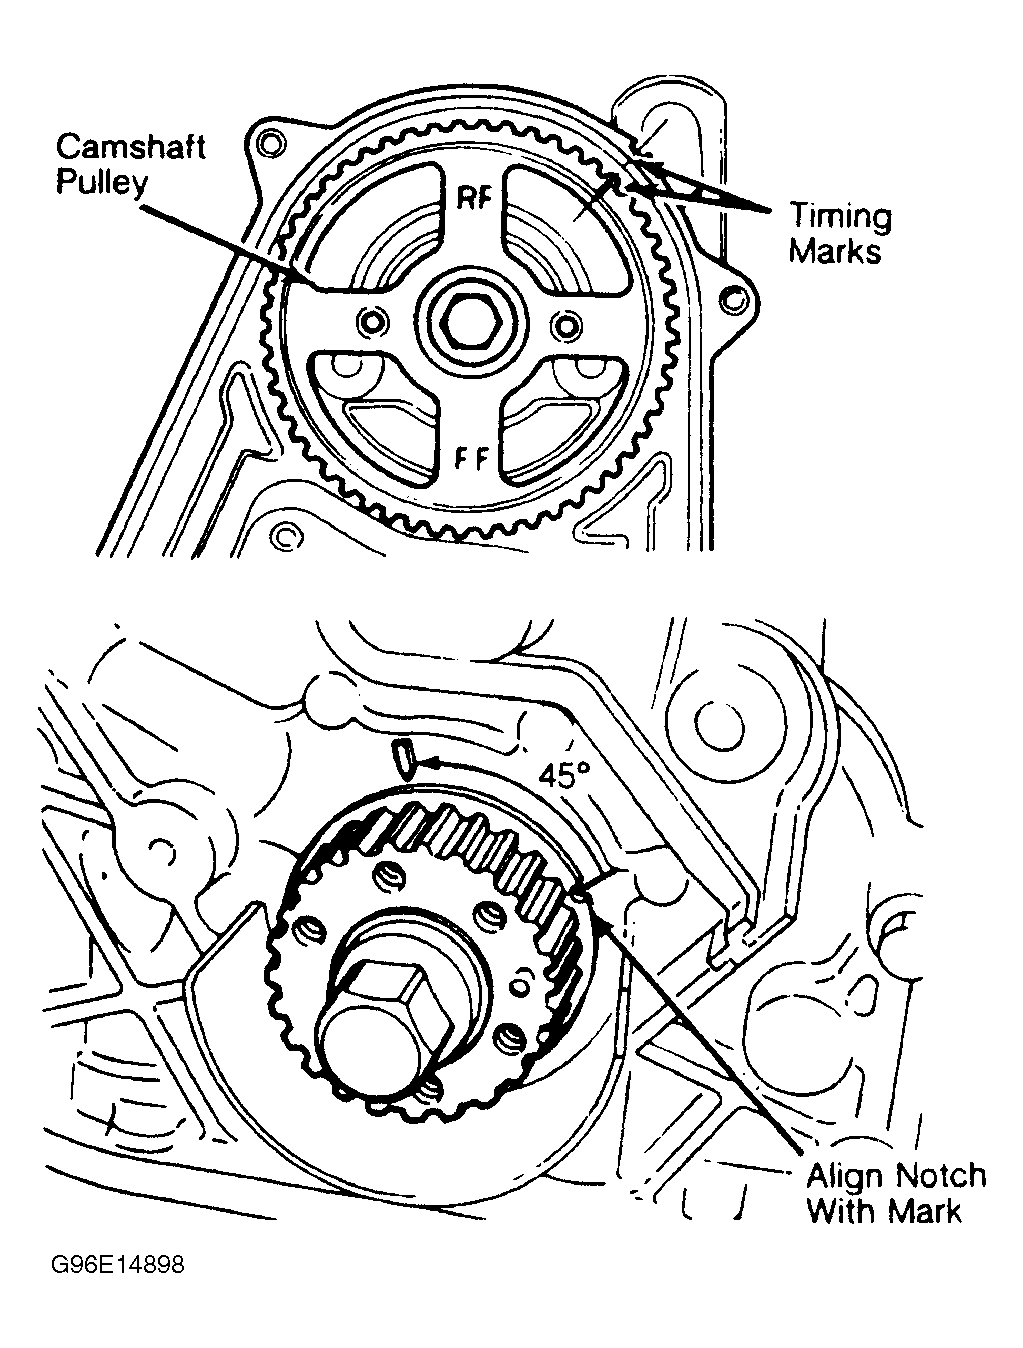 1985 Mazda 626 Serpentine Belt Routing and Timing Belt Diagrams